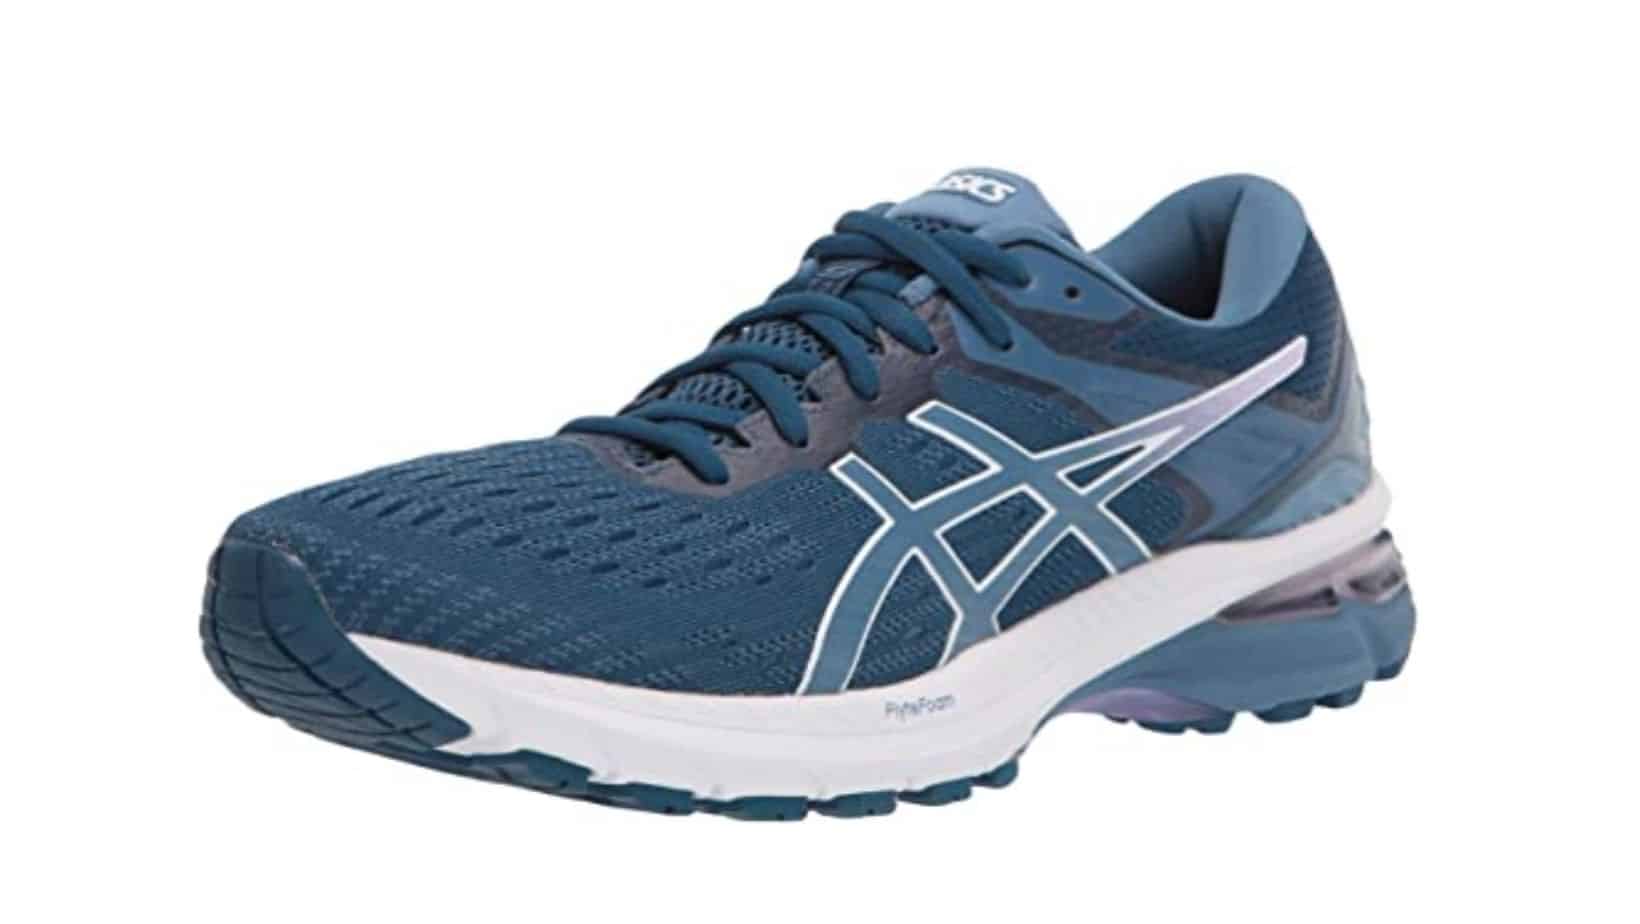 Best Running Shoes for Peroneal Tendonitis in 2022